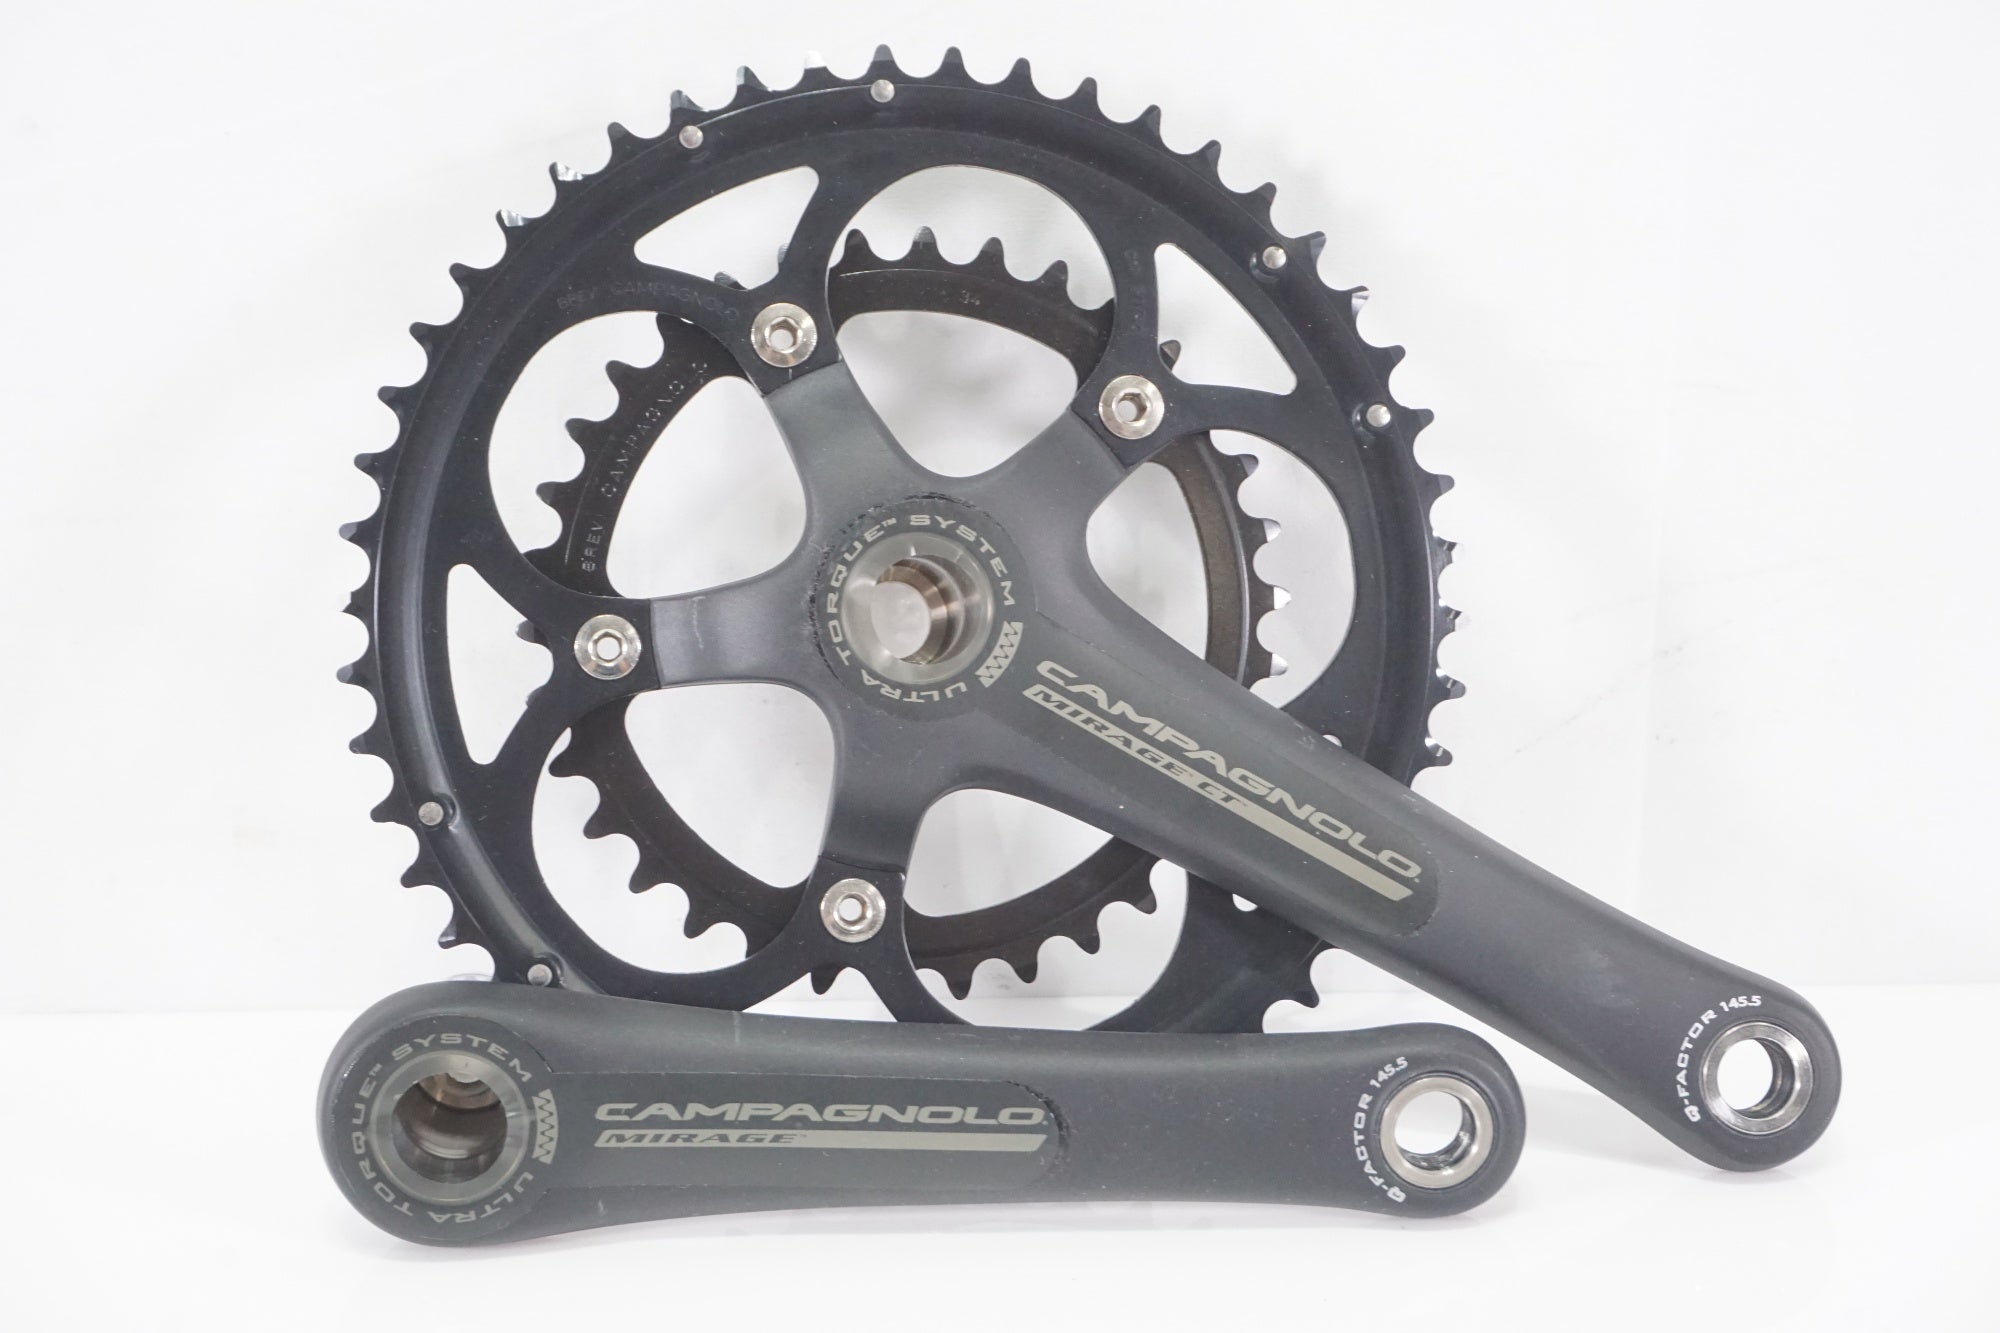 CAMPAGNOLO 「カンパニョーロ」 MIRAGE CT 50-34T 10S 170mm クランク 